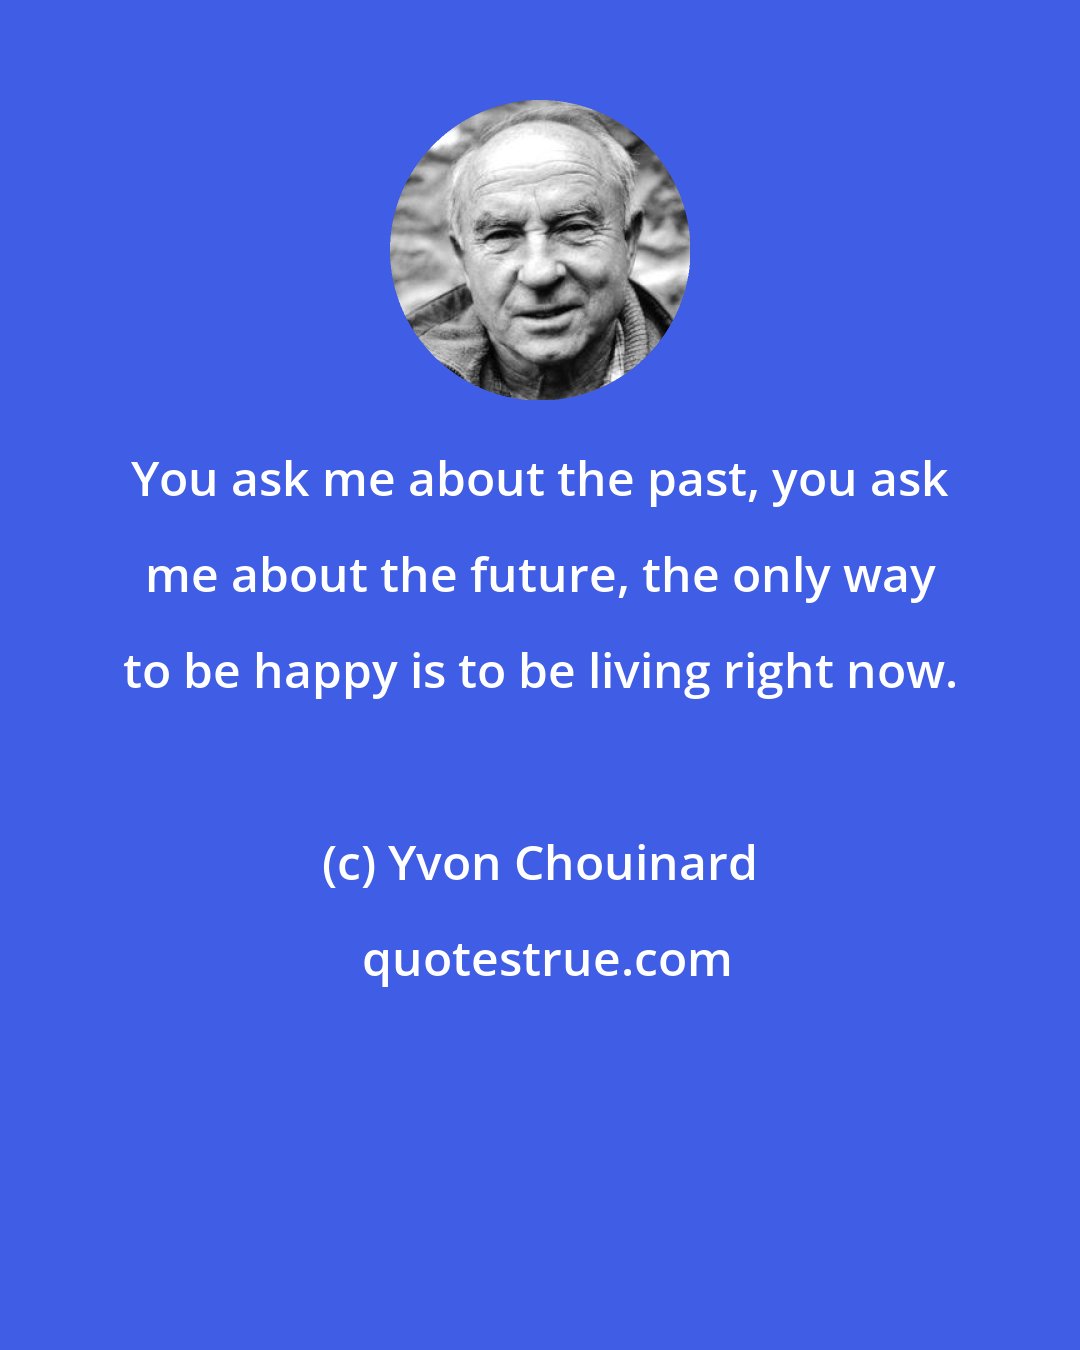 Yvon Chouinard: You ask me about the past, you ask me about the future, the only way to be happy is to be living right now.